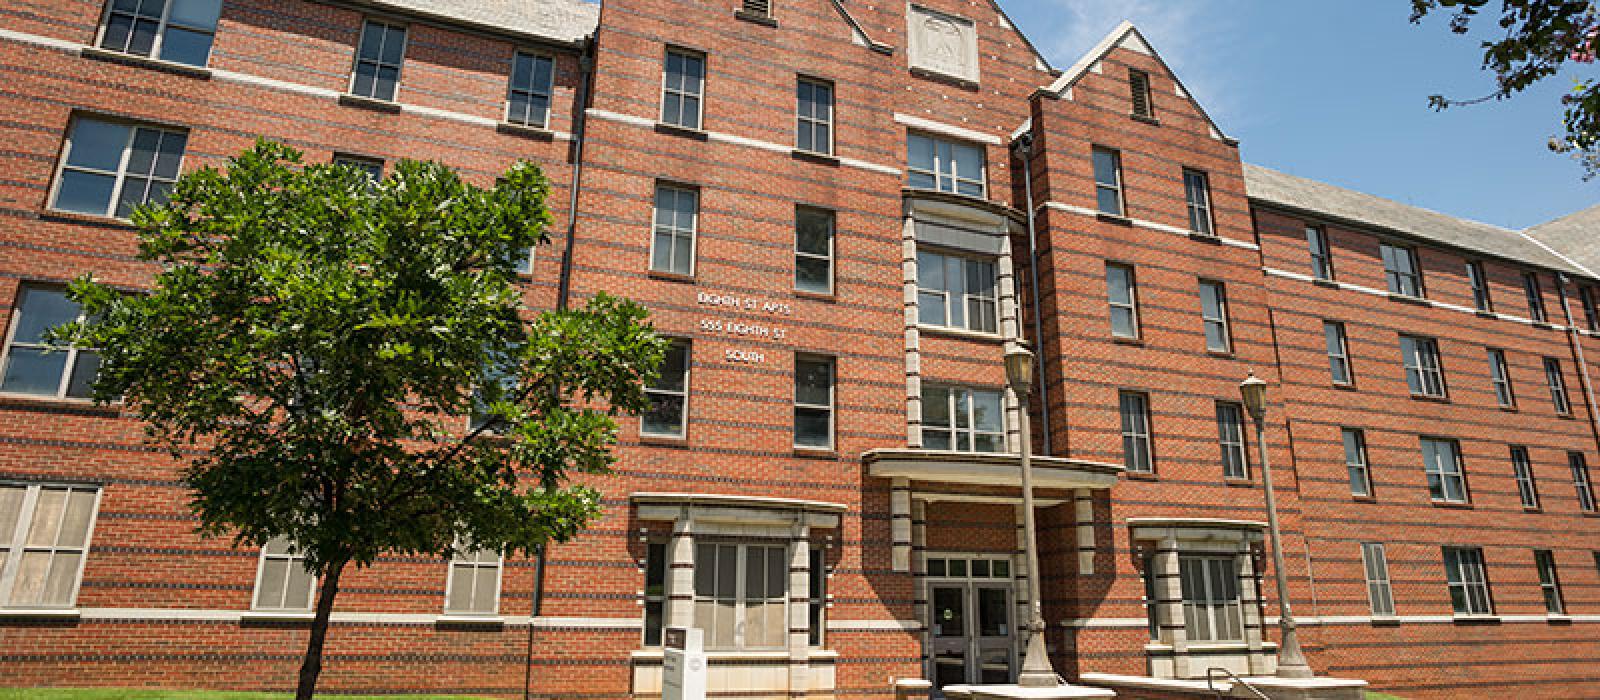 Eighth Street South Apartments building